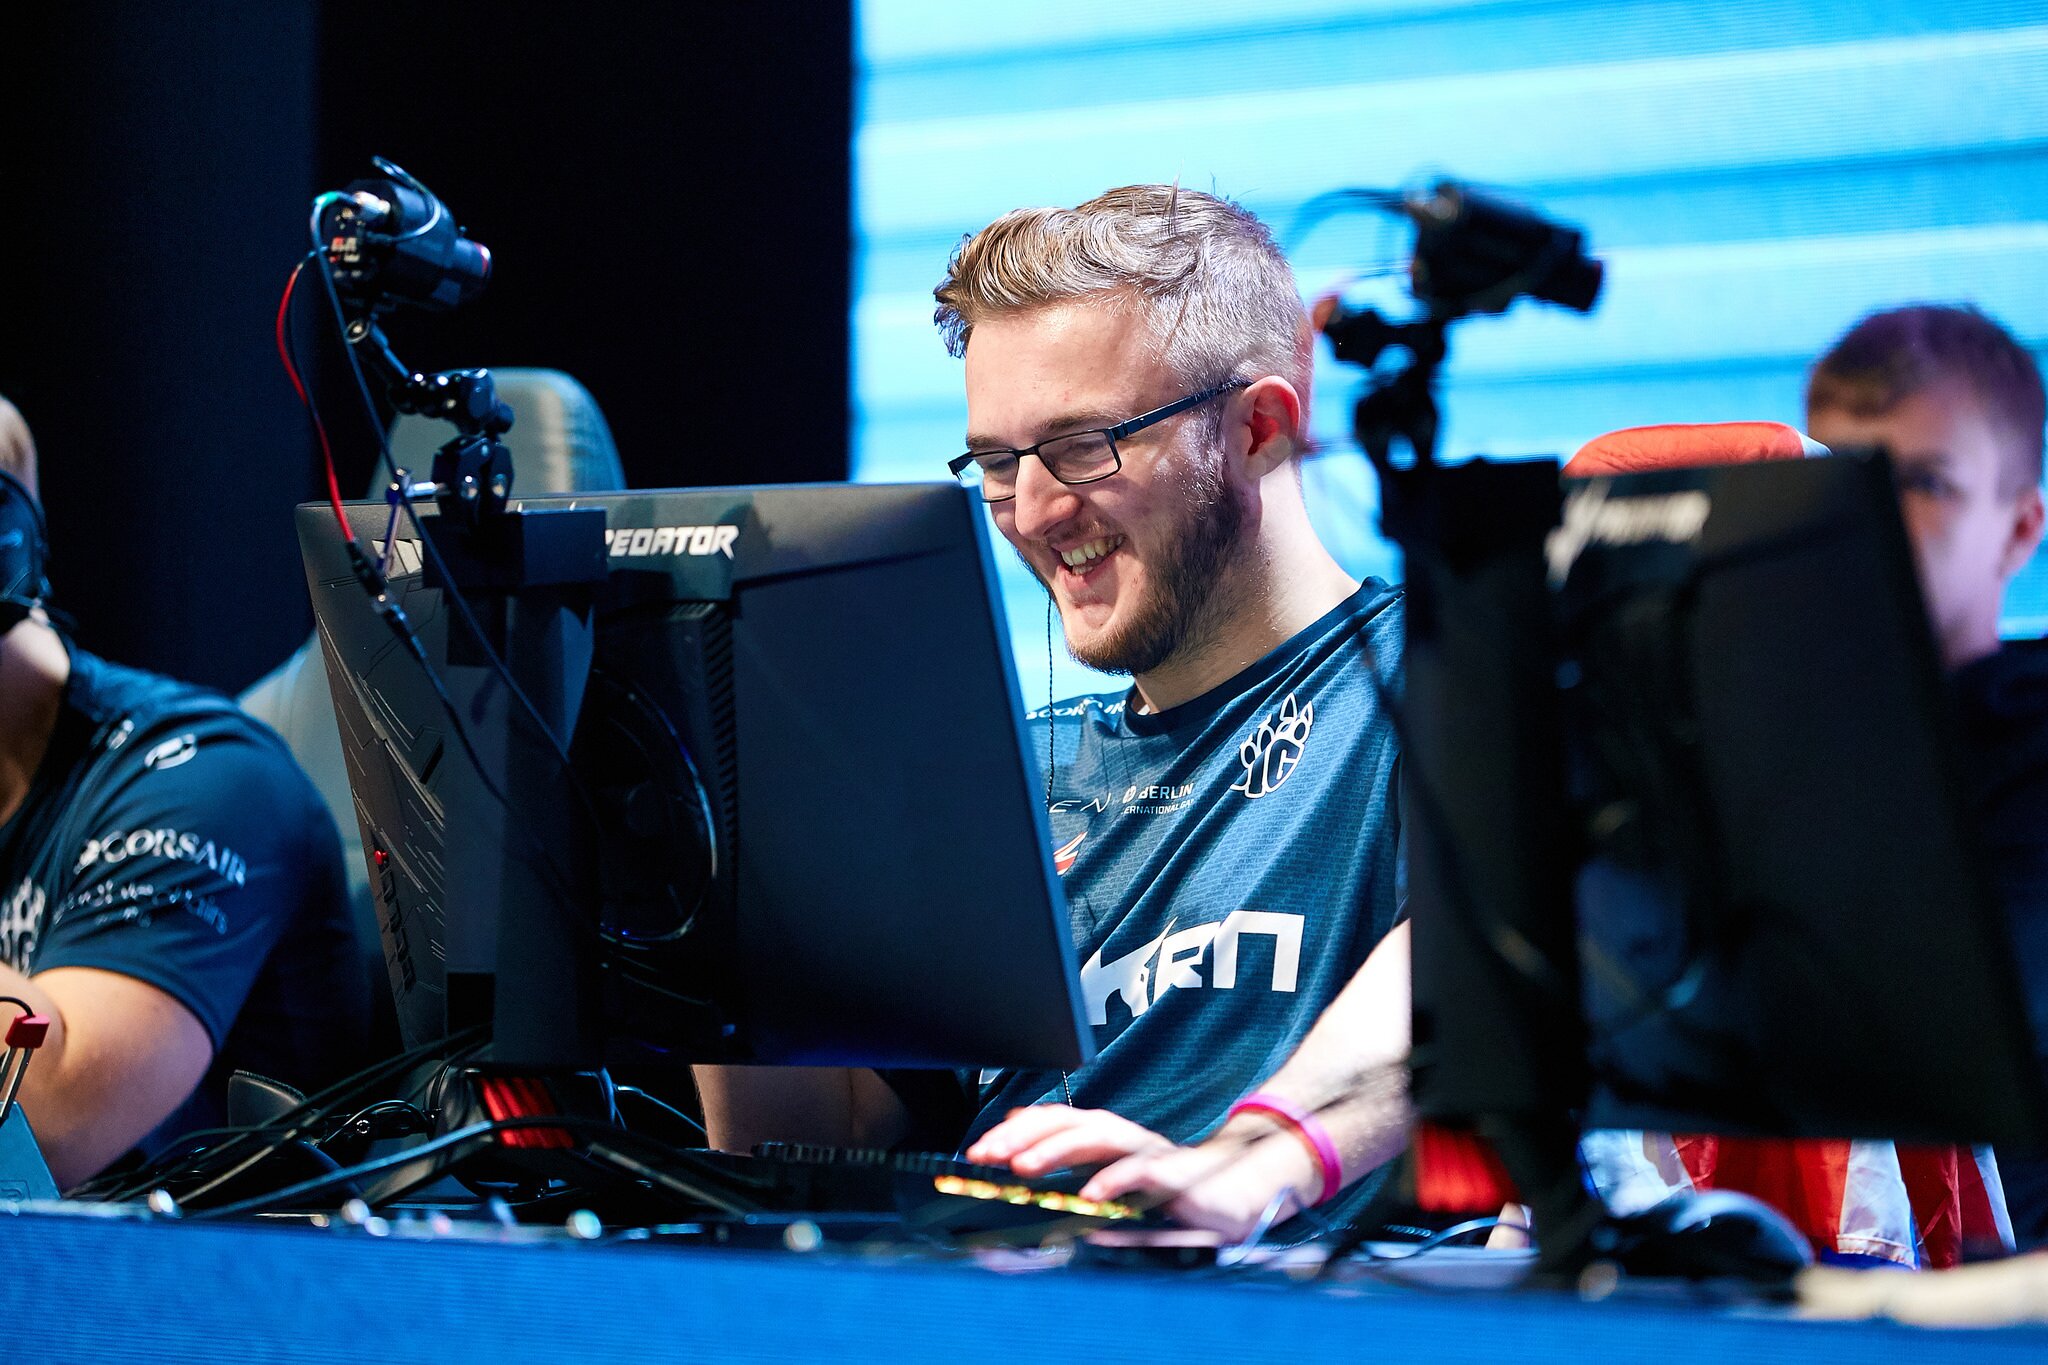 Roughly two months after his decision to step down from BIG, a sobering question arises: where does Smooya go from here?